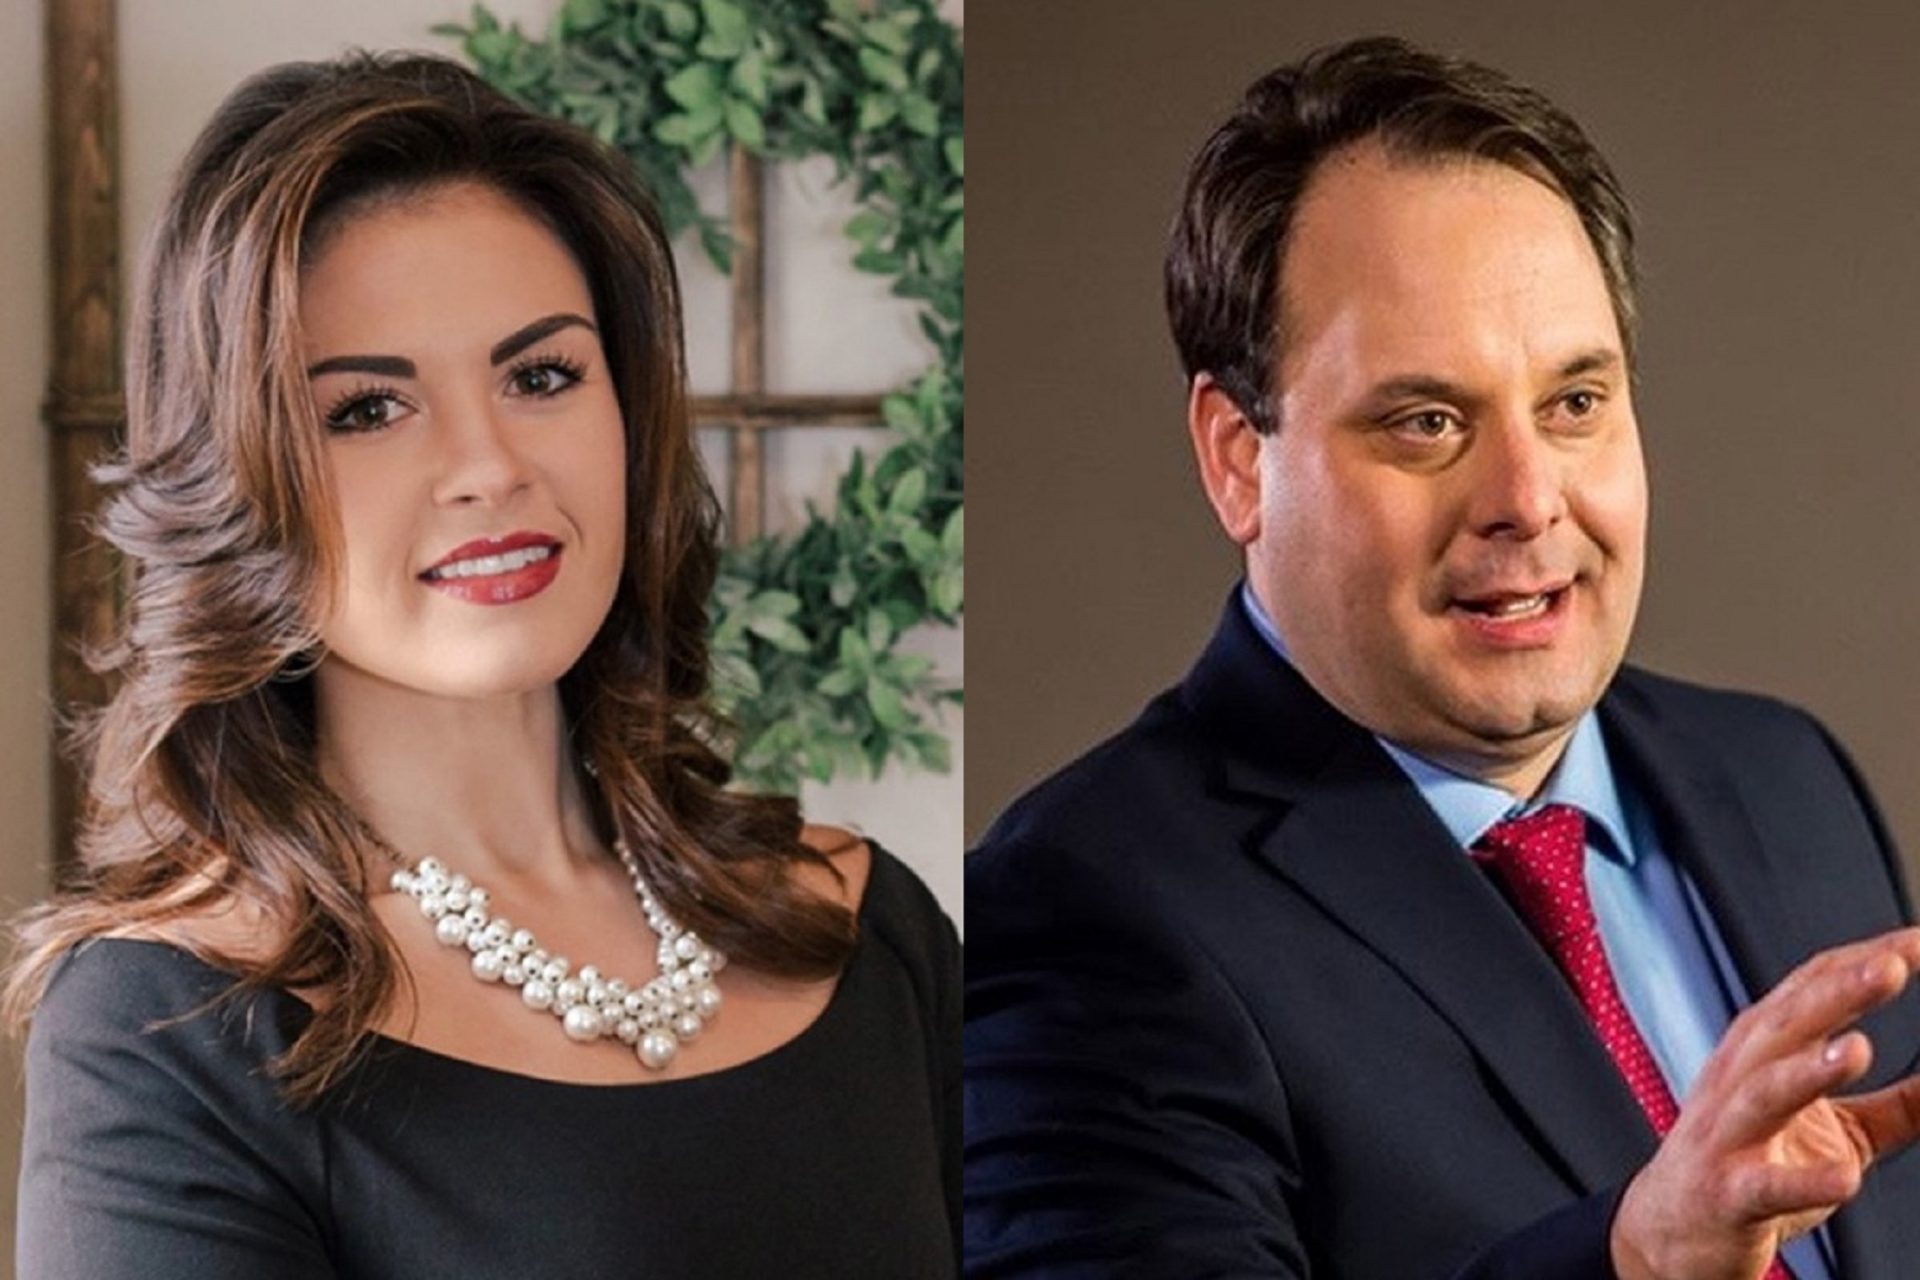 Voters in District 18 of the Pennsylvania House of Representatives, will choose between Republican K.C. Tomlinson (left) and Democrat Harold Hayes in a special election Tuesday, March 17, 2020.